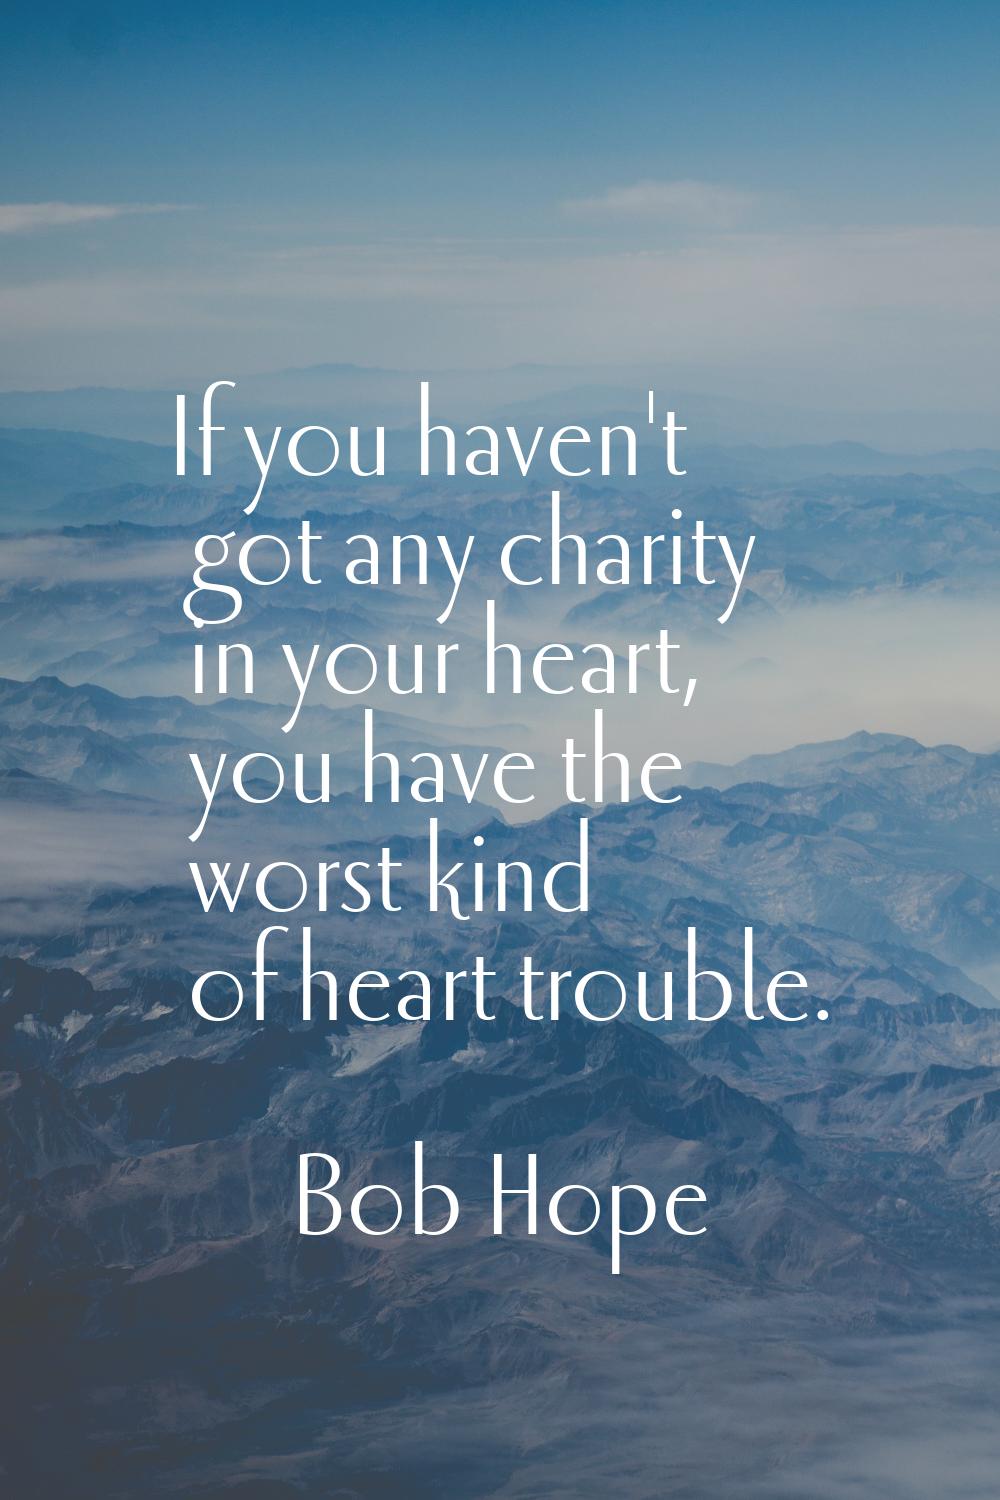 If you haven't got any charity in your heart, you have the worst kind of heart trouble.